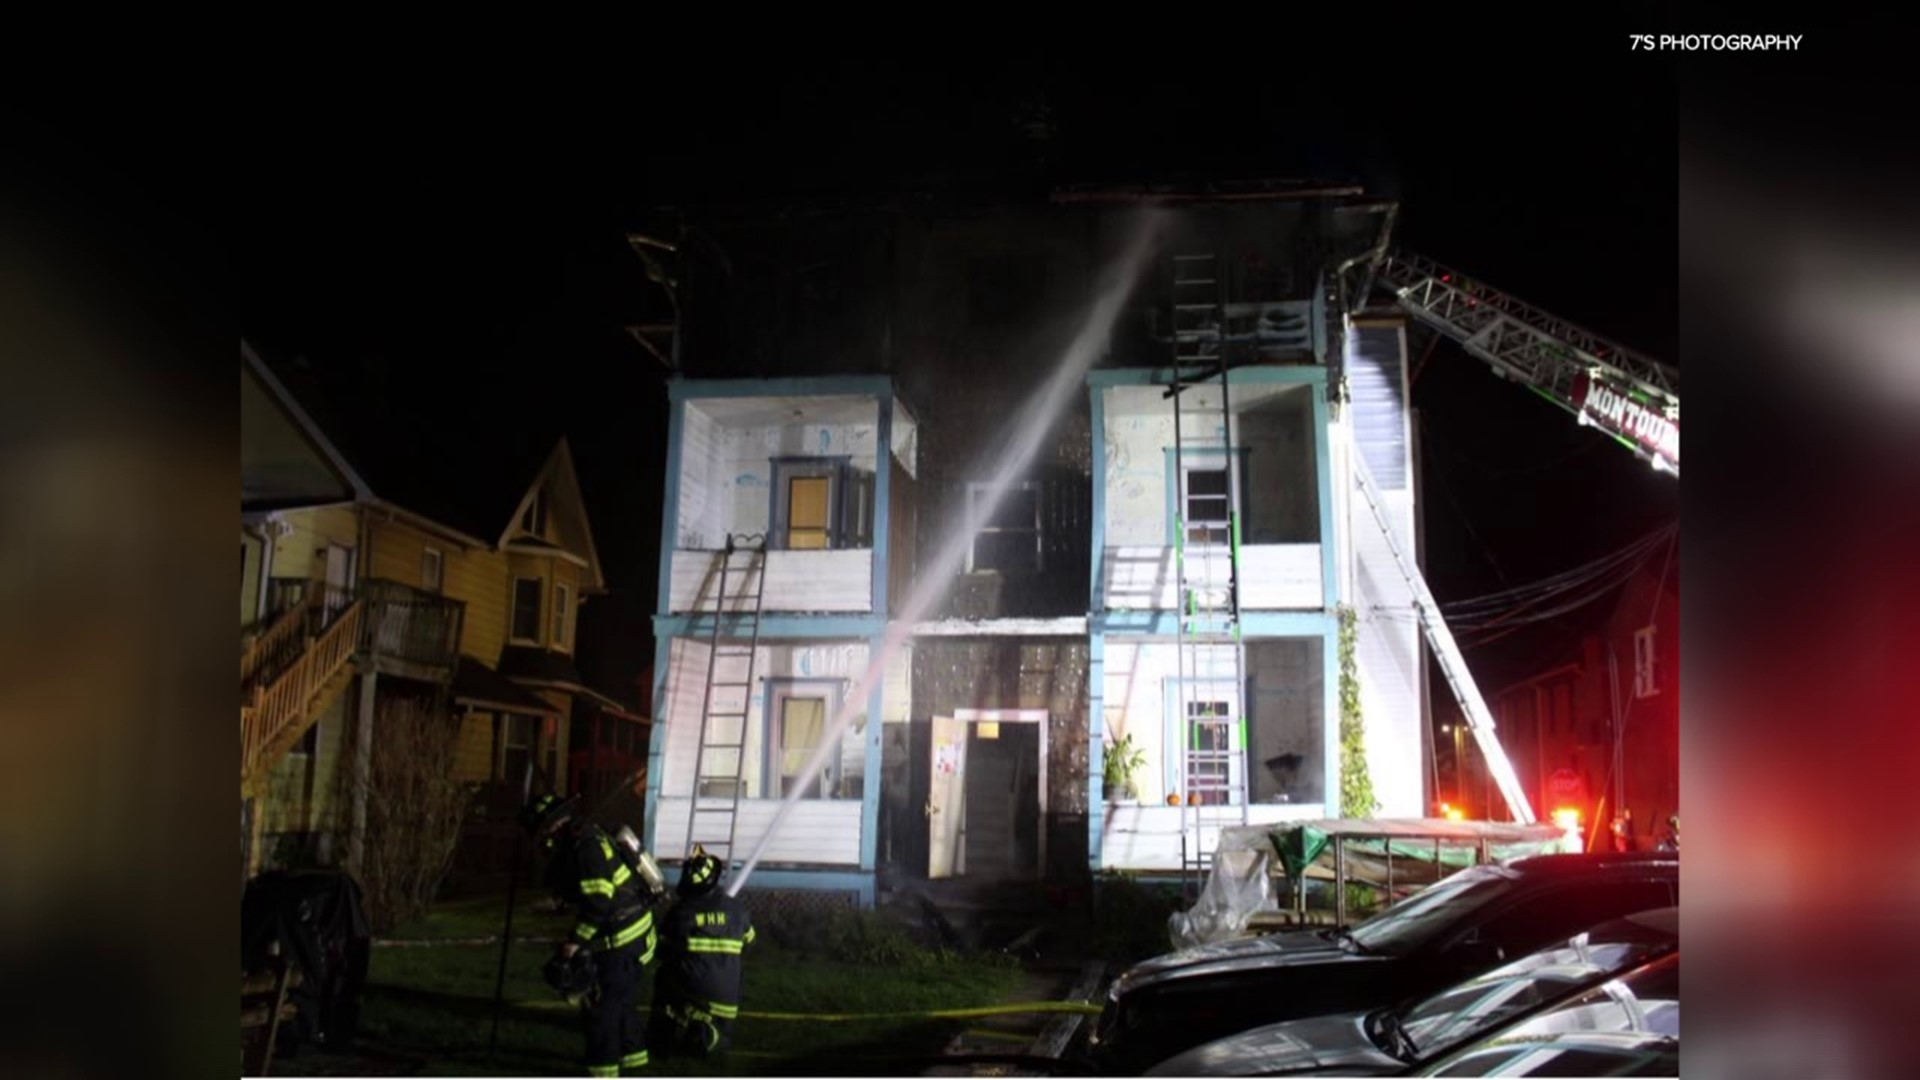 Flames broke out around 1:30 a.m. Sunday along West 4th Street in the city.